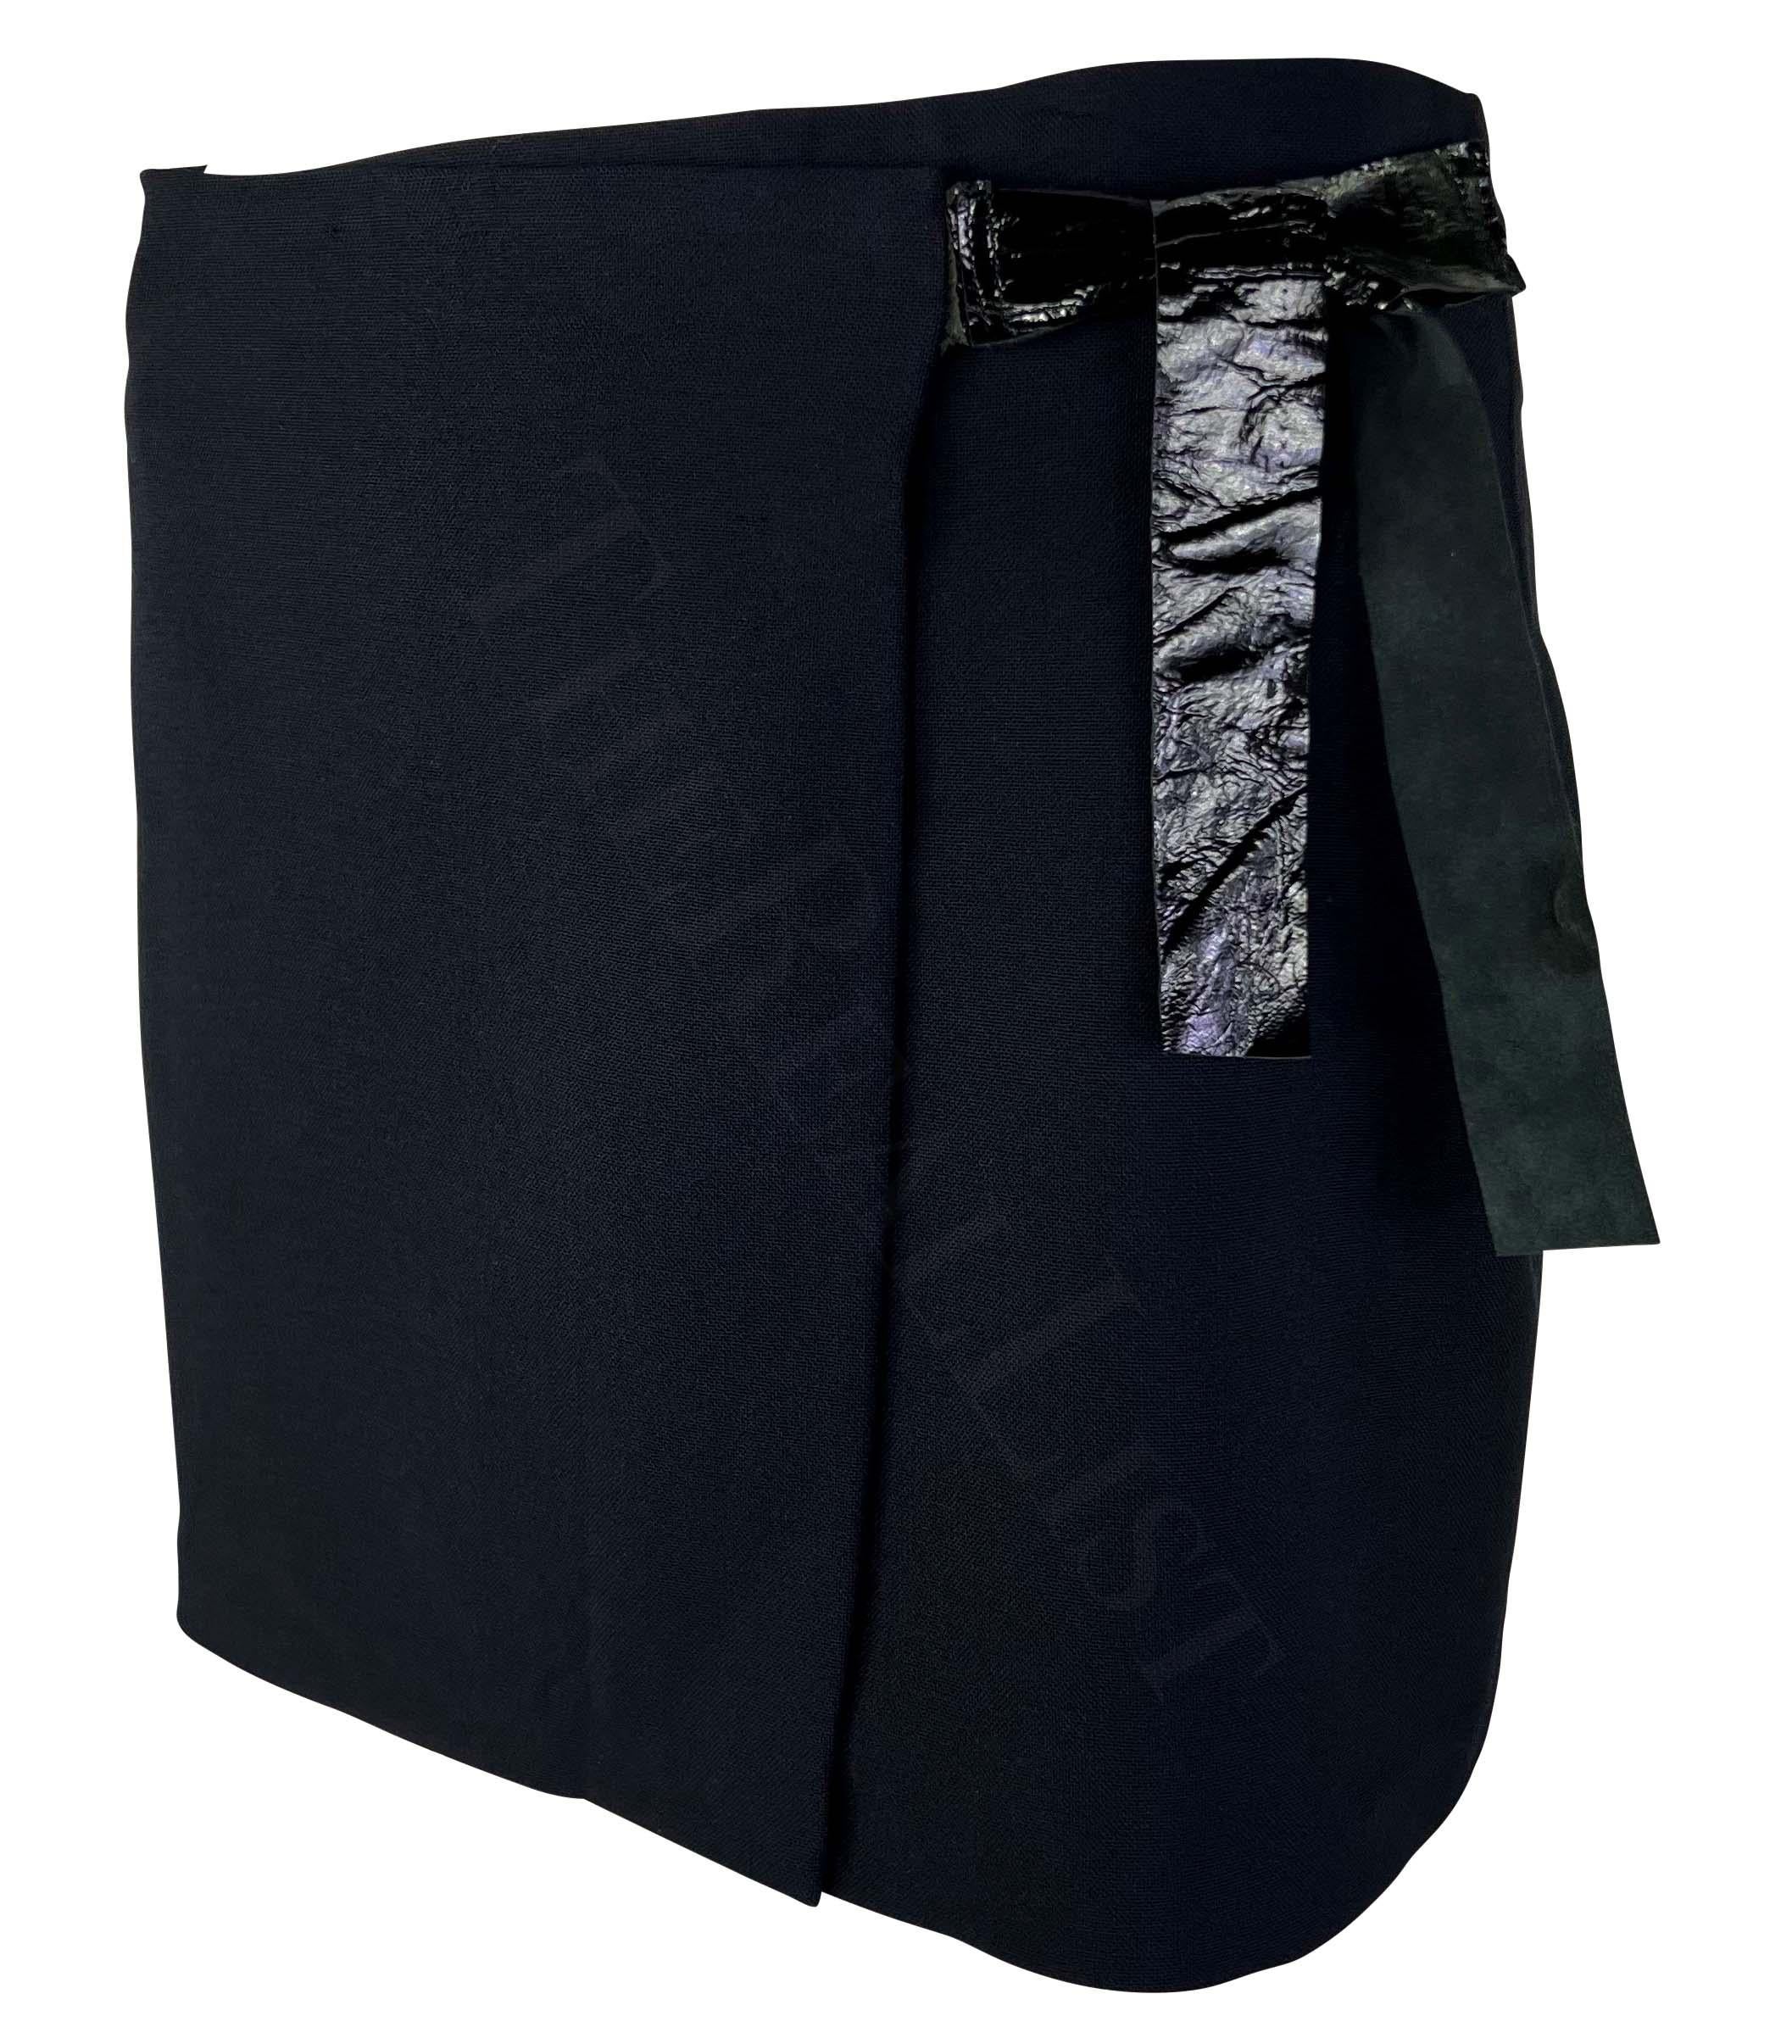 Presenting a fabulous navy Gucci wrap skirt, designed by Tom Ford. From the Spring/Summer 1998 collection, this sample skirt features a patent leather tie accent at one hip. A true prototype, the leather detail shows varying closure techniques. Add